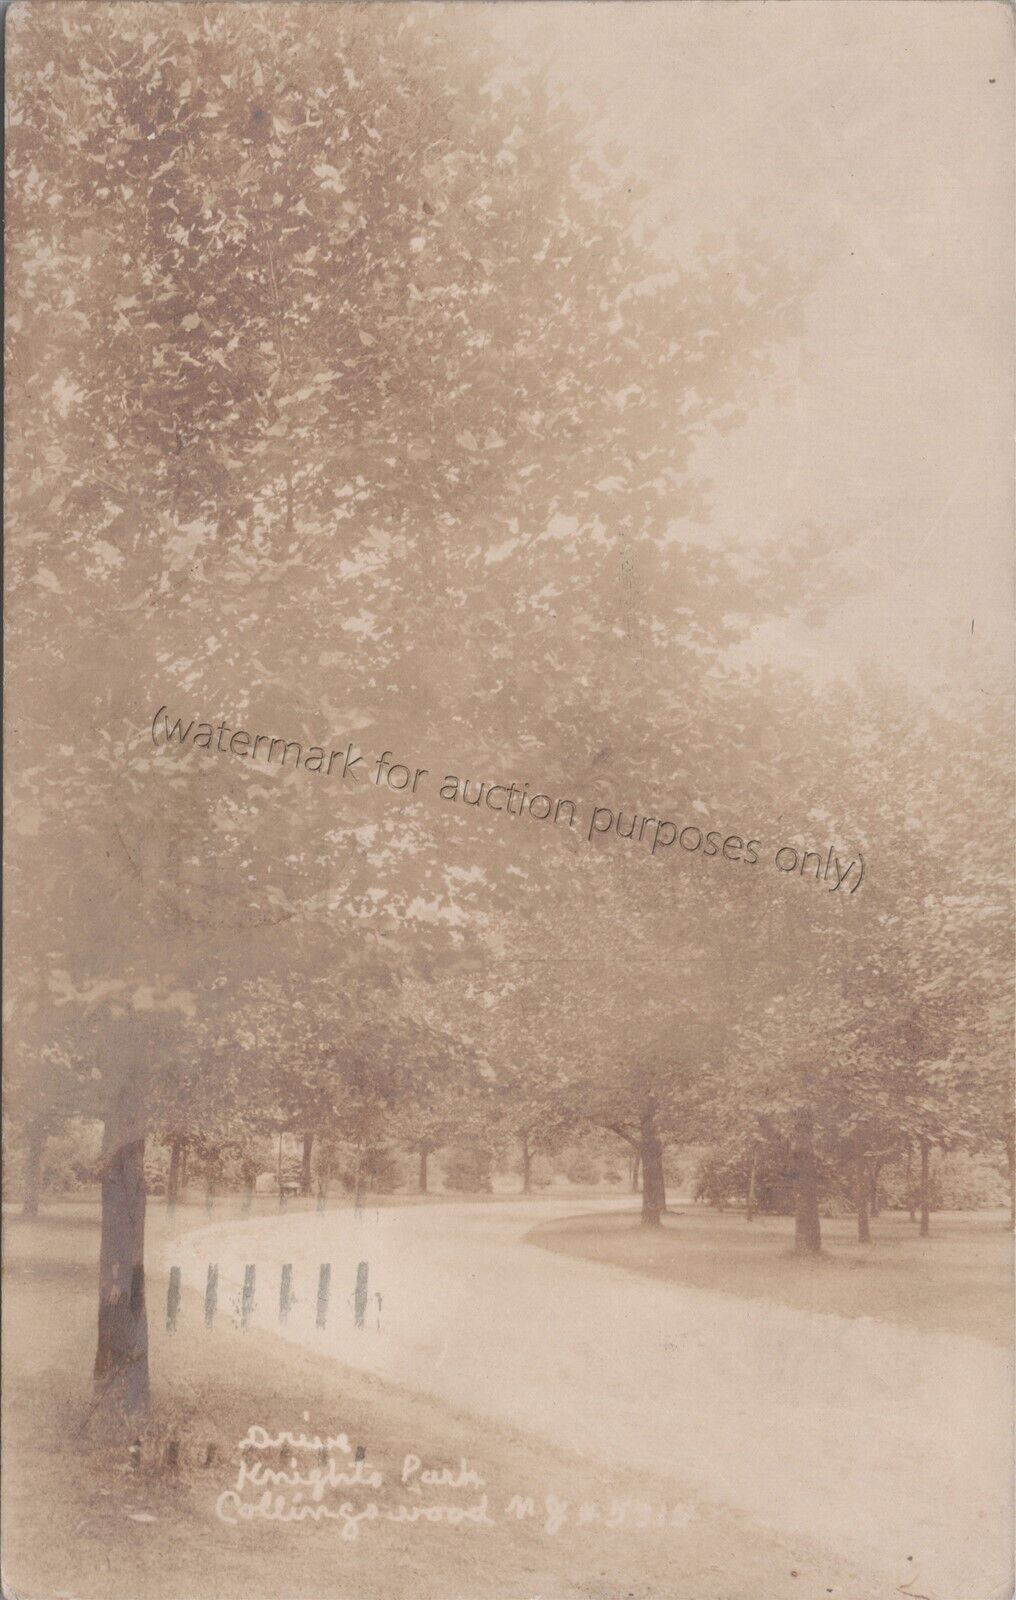 Collingswood, NJ: RPPC Knights Park 1934 - Camden New Jersey Real Photo Postcard